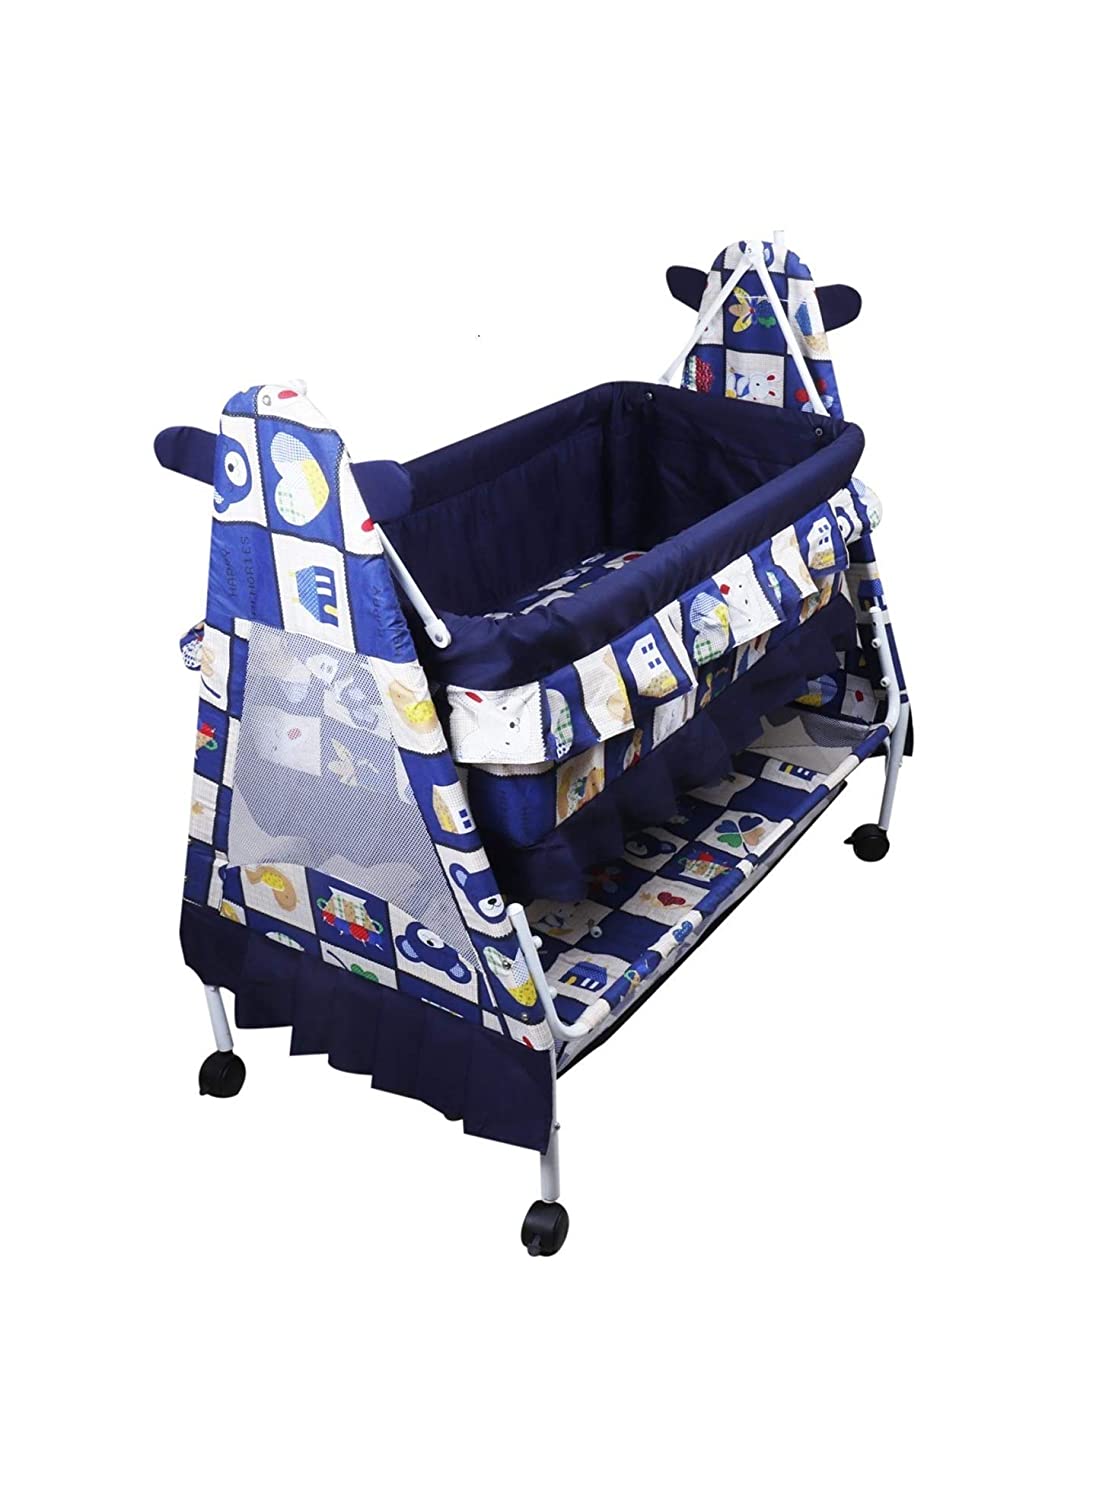 NHR Fun Baby Cozy New Born baby Cradle / baby jhula / baby palna crib /  Bassinet with Mosquito Net and Bottle Holder Bassinet - Buy baby Bassinet -  Buy Babycare products in India.